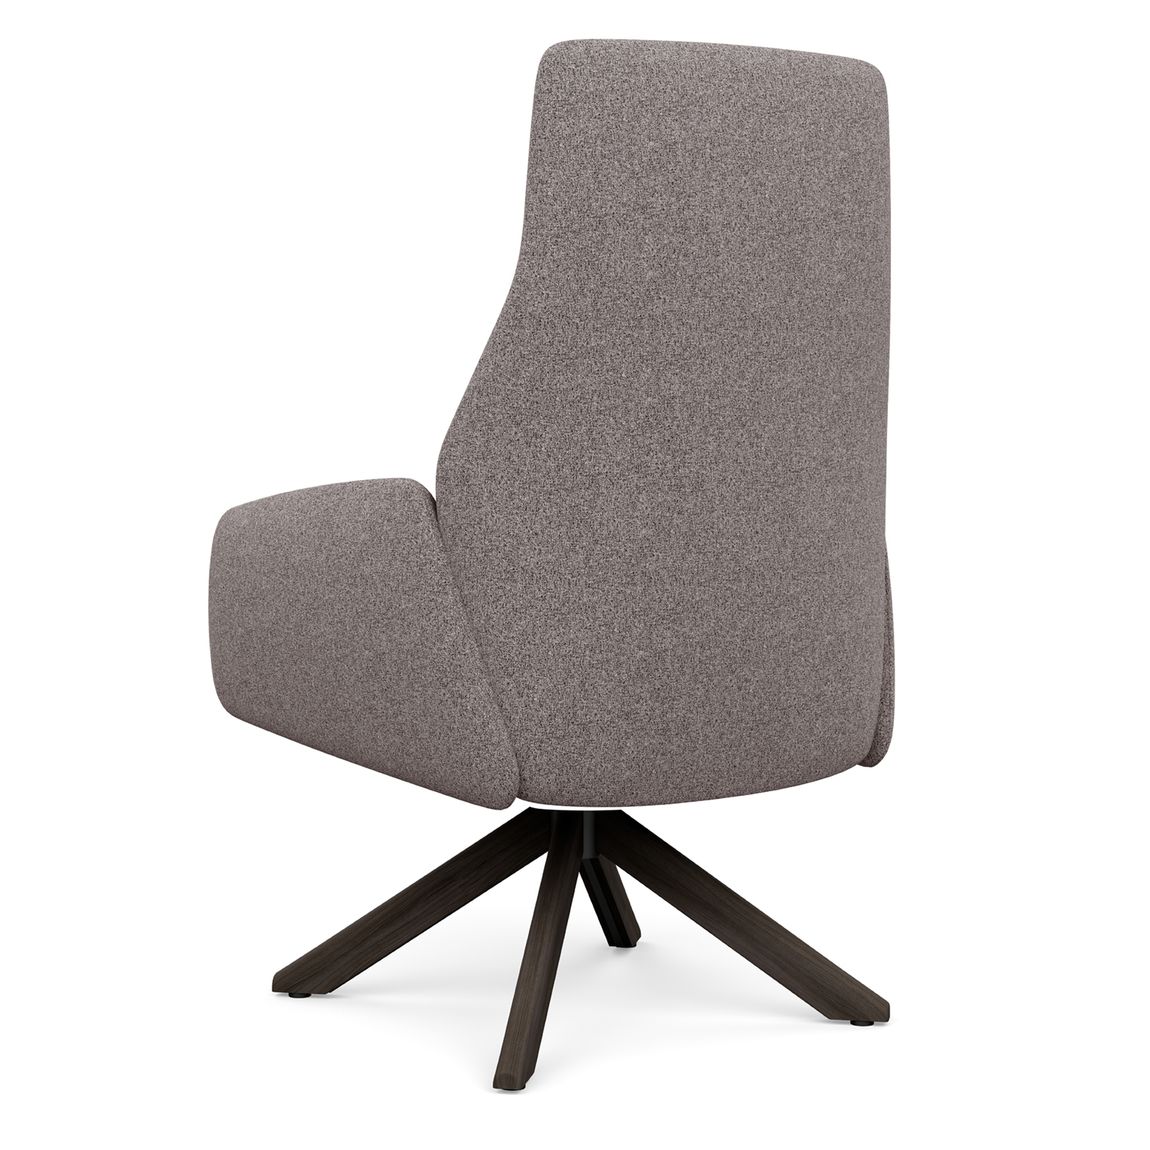 Modern Lounge Chair with Flex Back